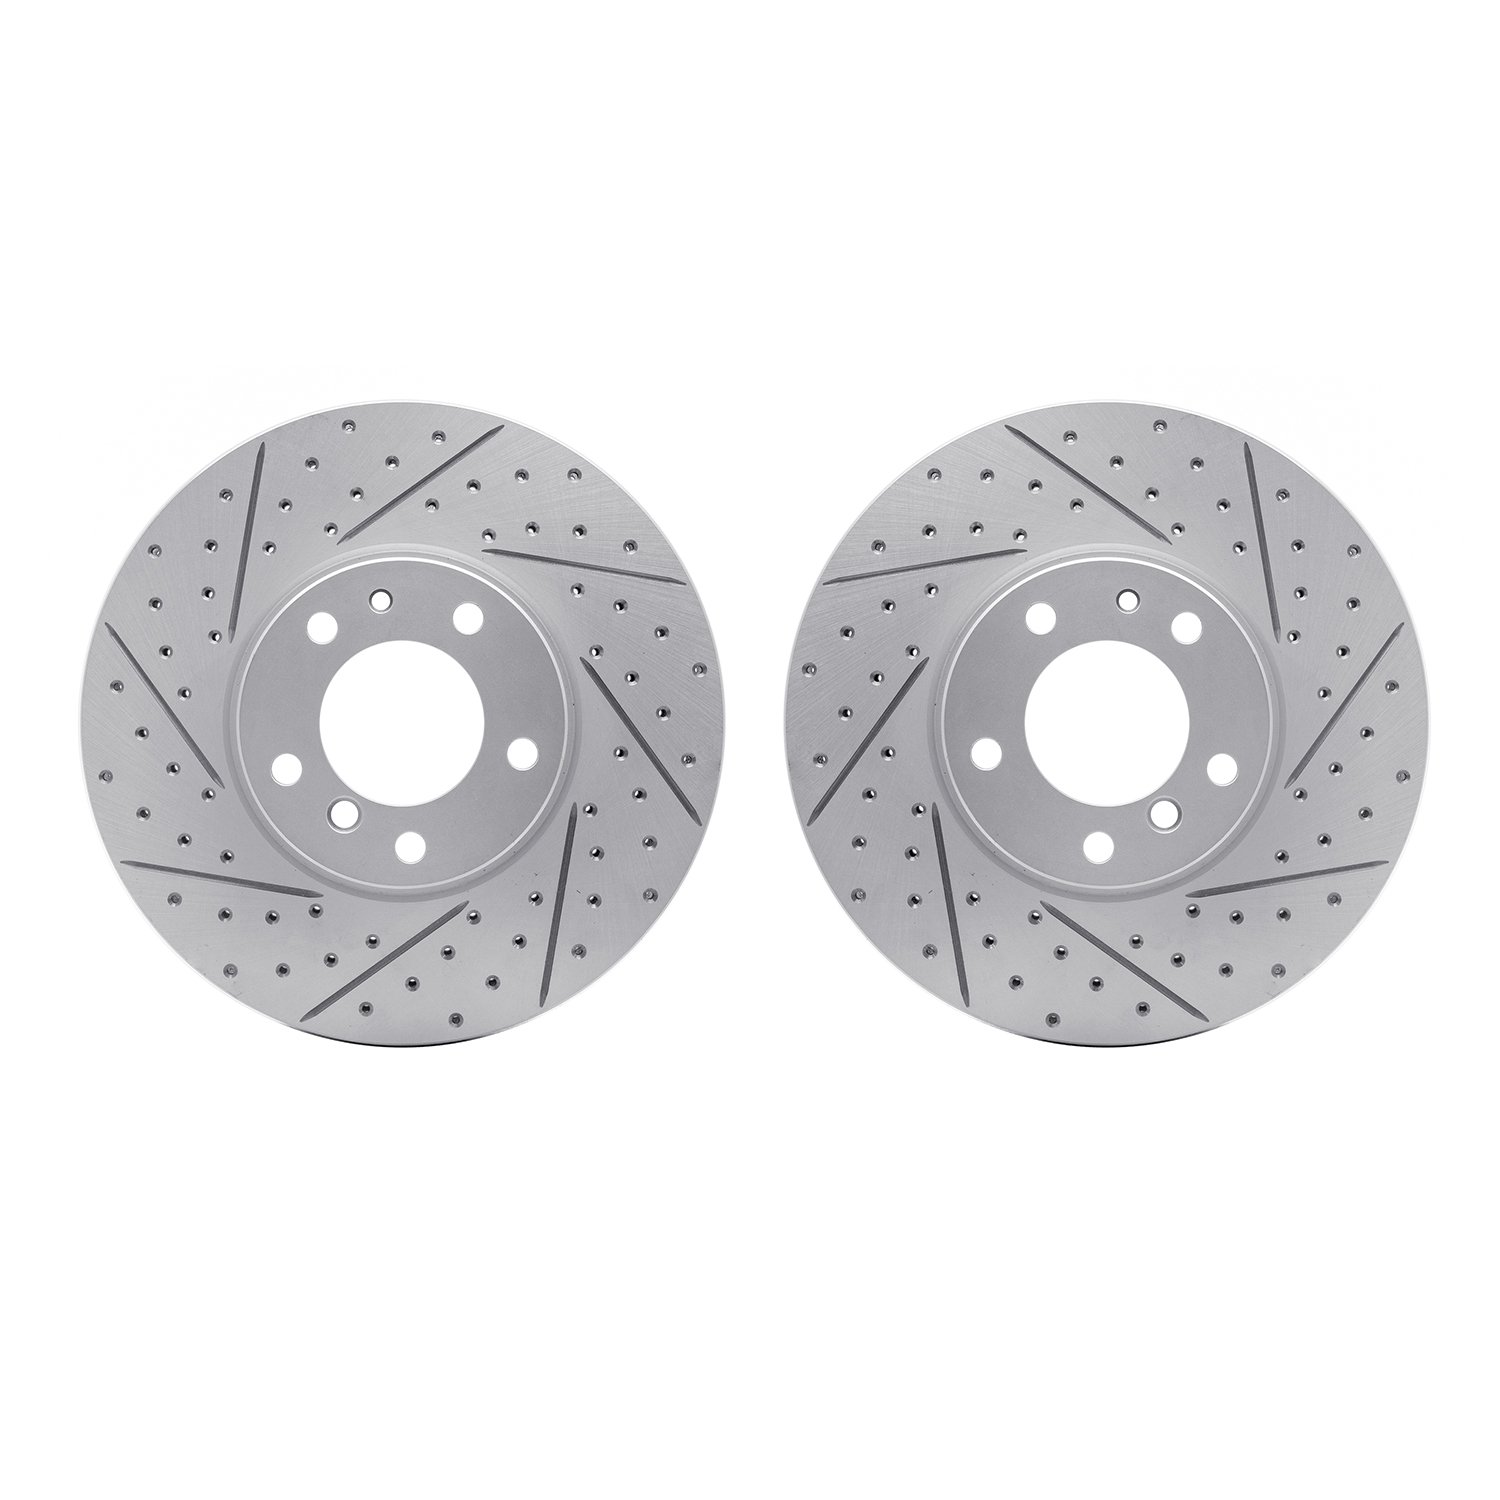 2002-31028 Geoperformance Drilled/Slotted Brake Rotors, 1991-2001 BMW, Position: Front